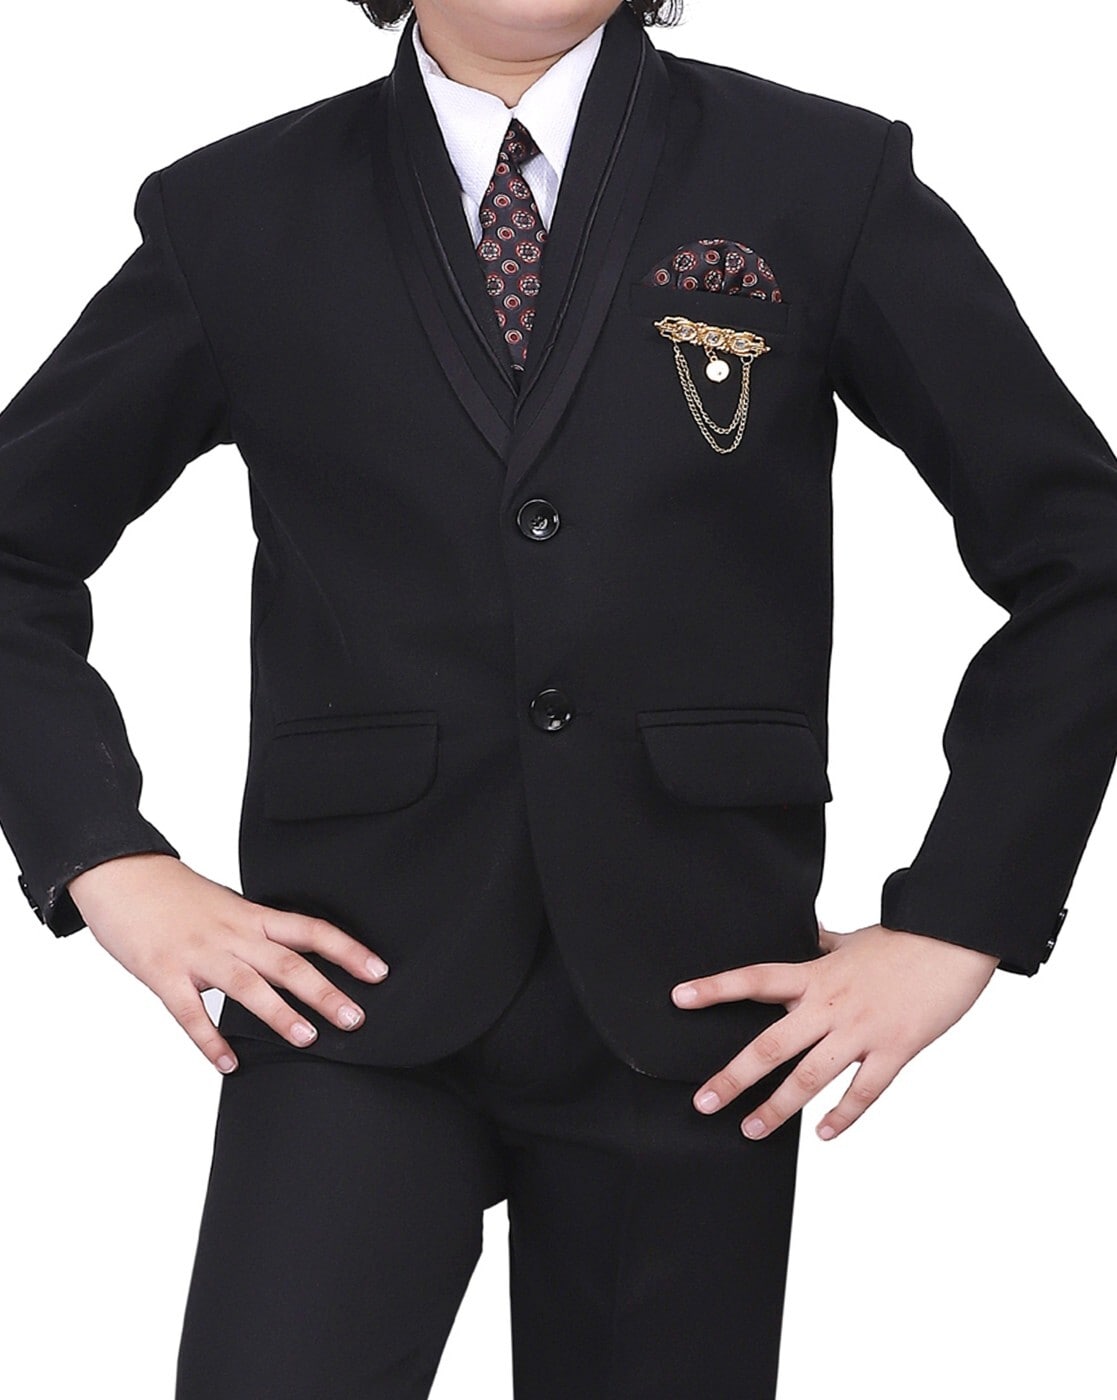 Boys Black Jacket Suit with Royal Blue Dickie Bow Tie | Charles Class